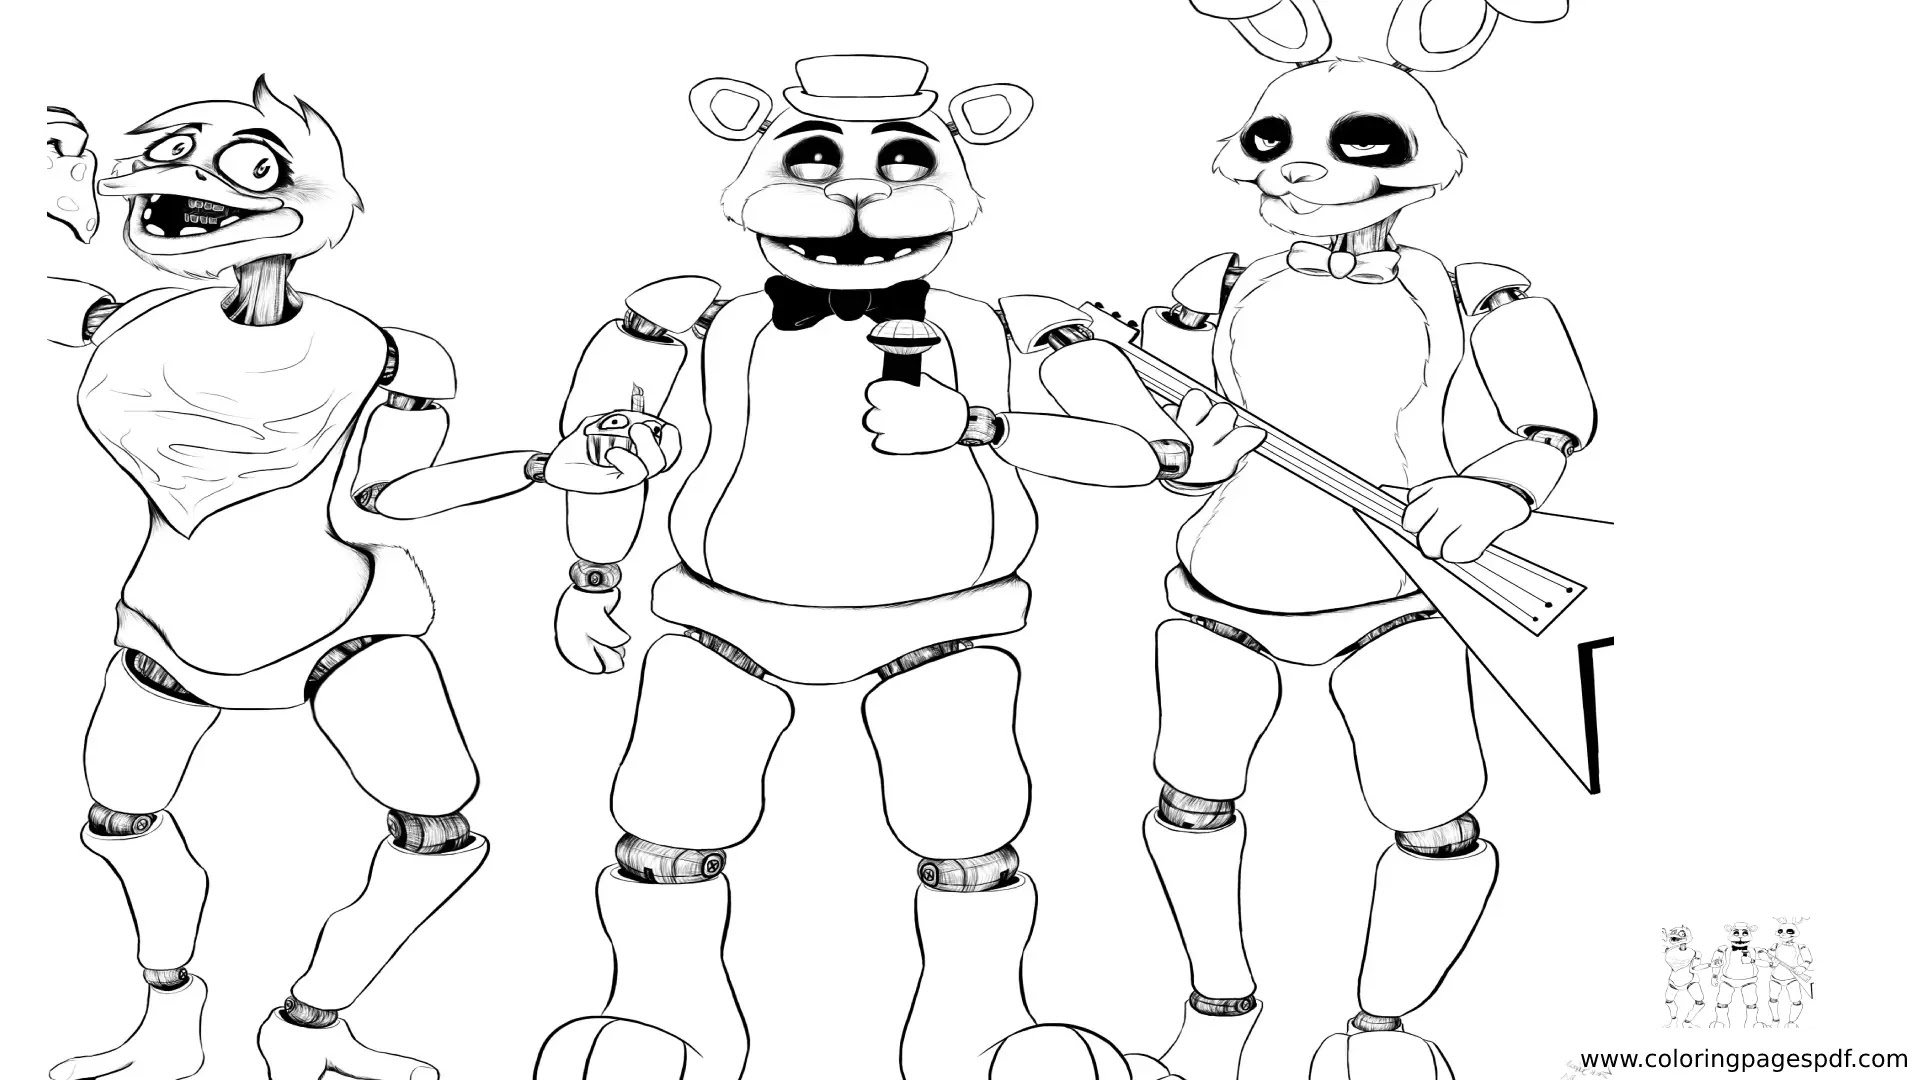 Coloring Pages Of Freddie, Bonnie, And Chica